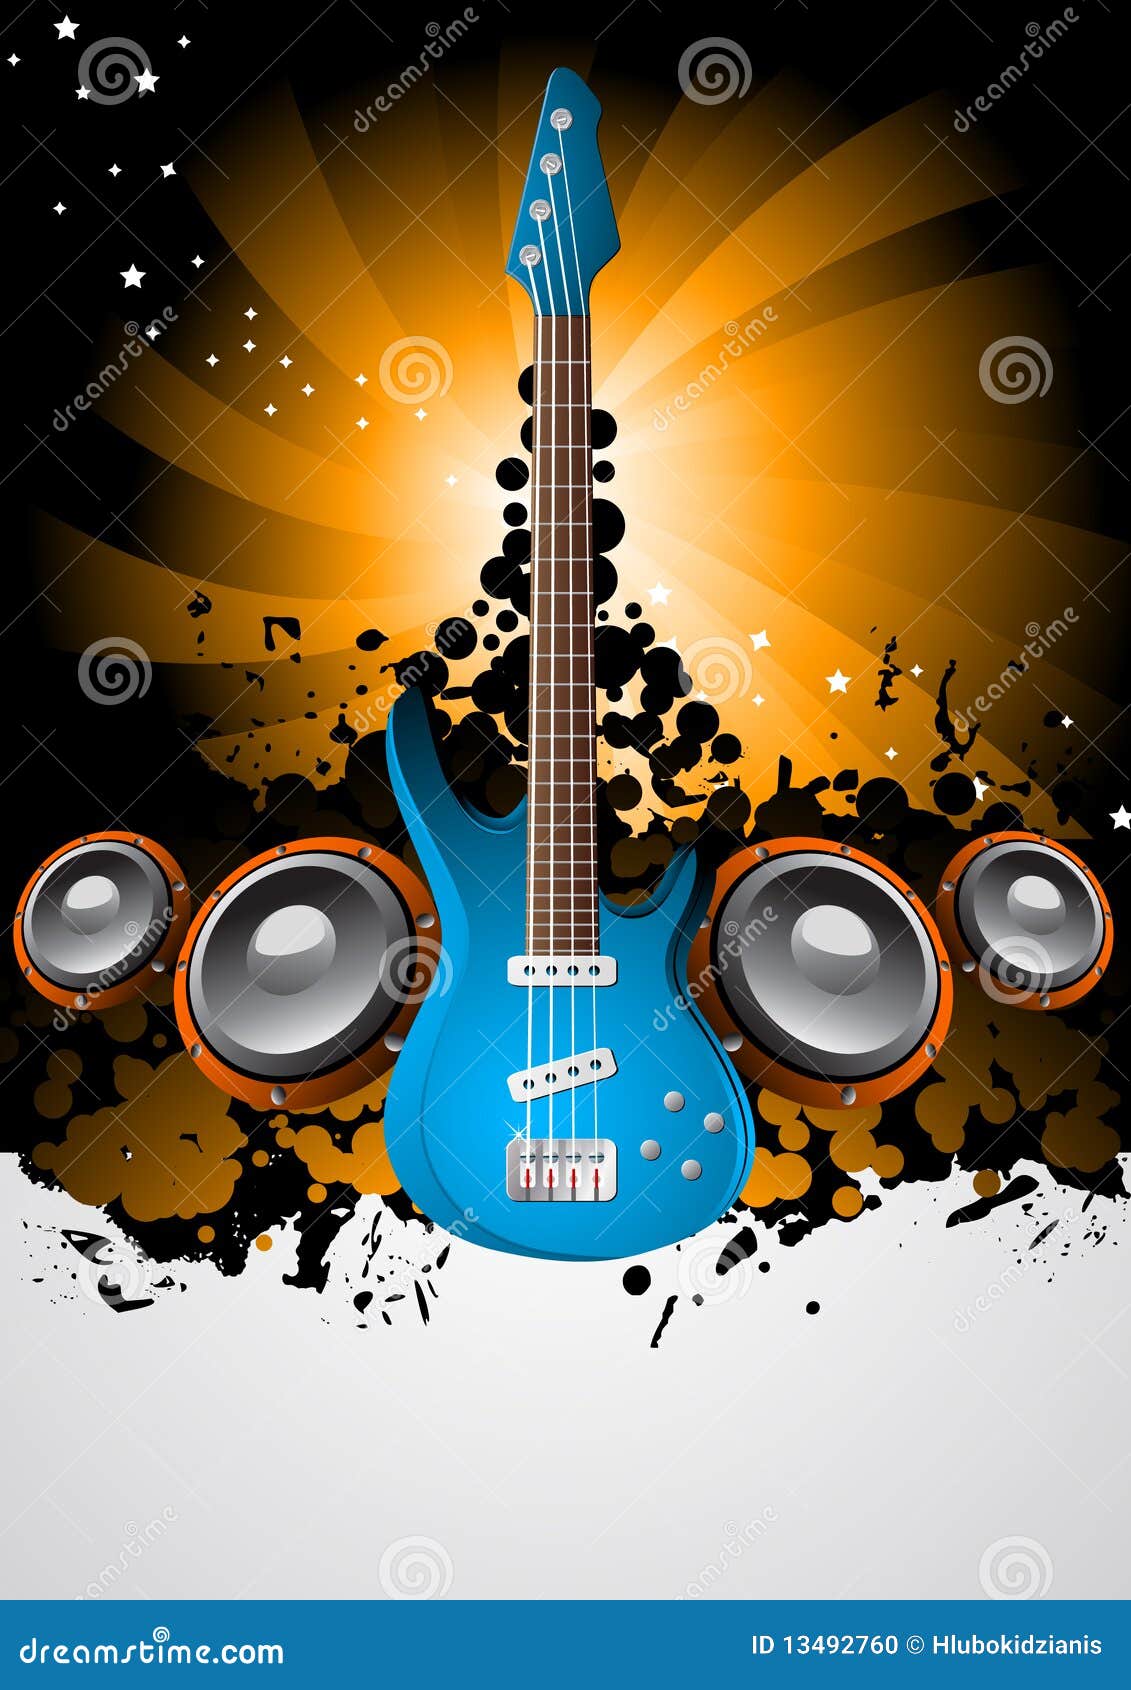 music poster clipart - photo #13